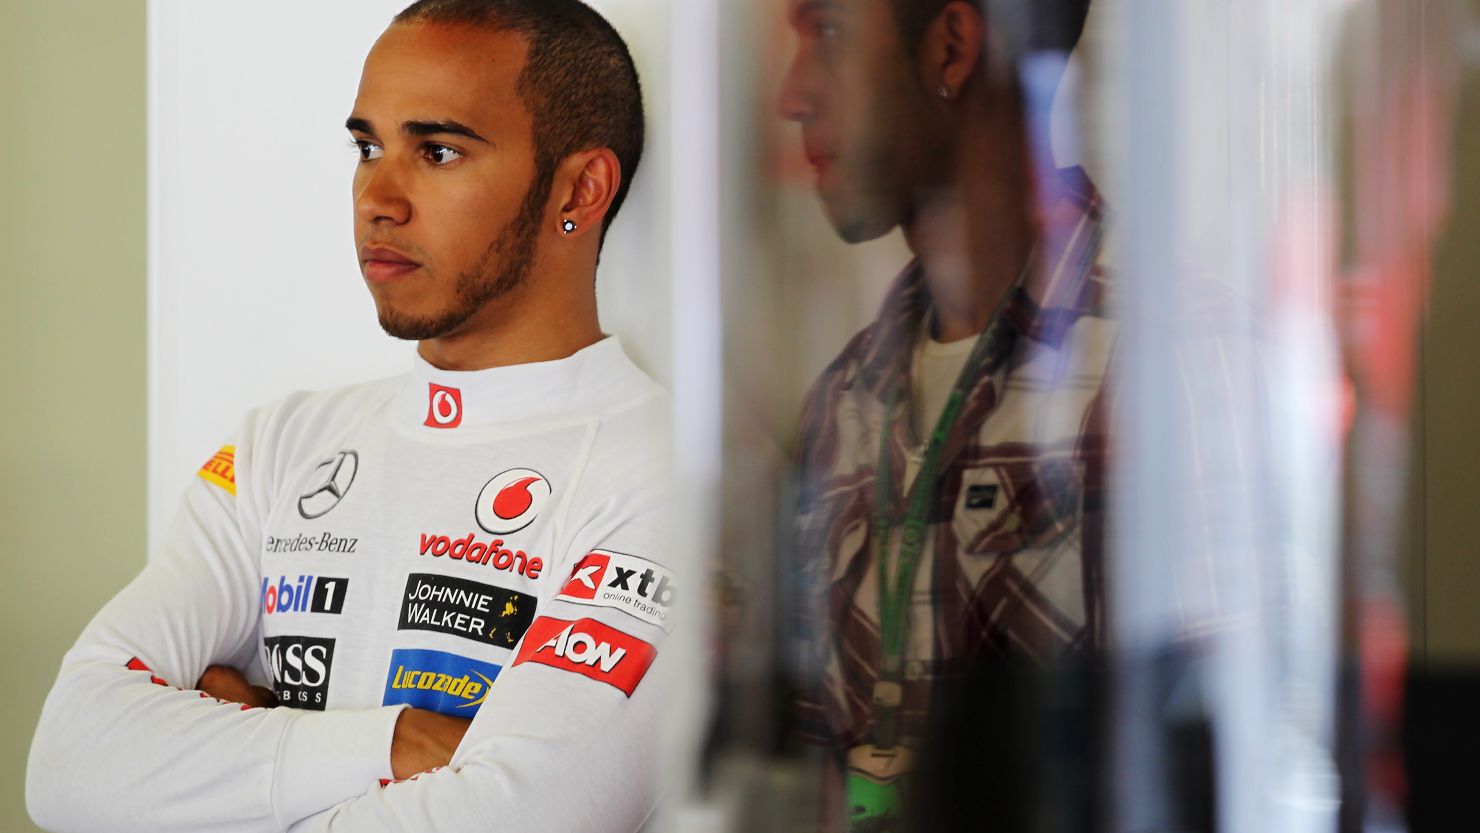 Lewis Hamilton thought he had captured his third pole position of the season